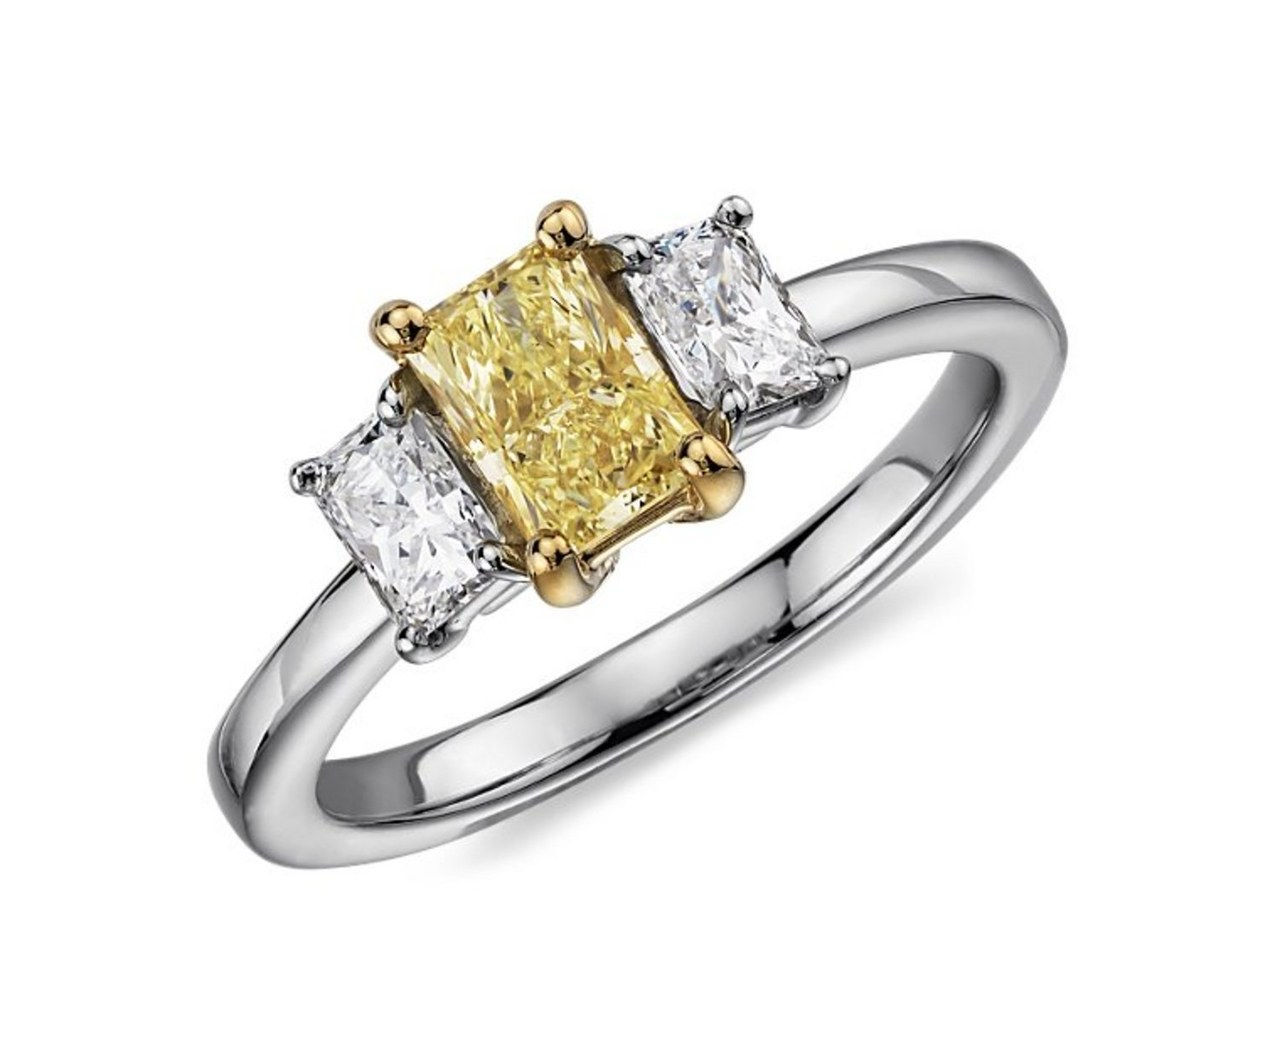 7 yelllow diamond engagement rings that look like kelly clarkson engagement ring 1216